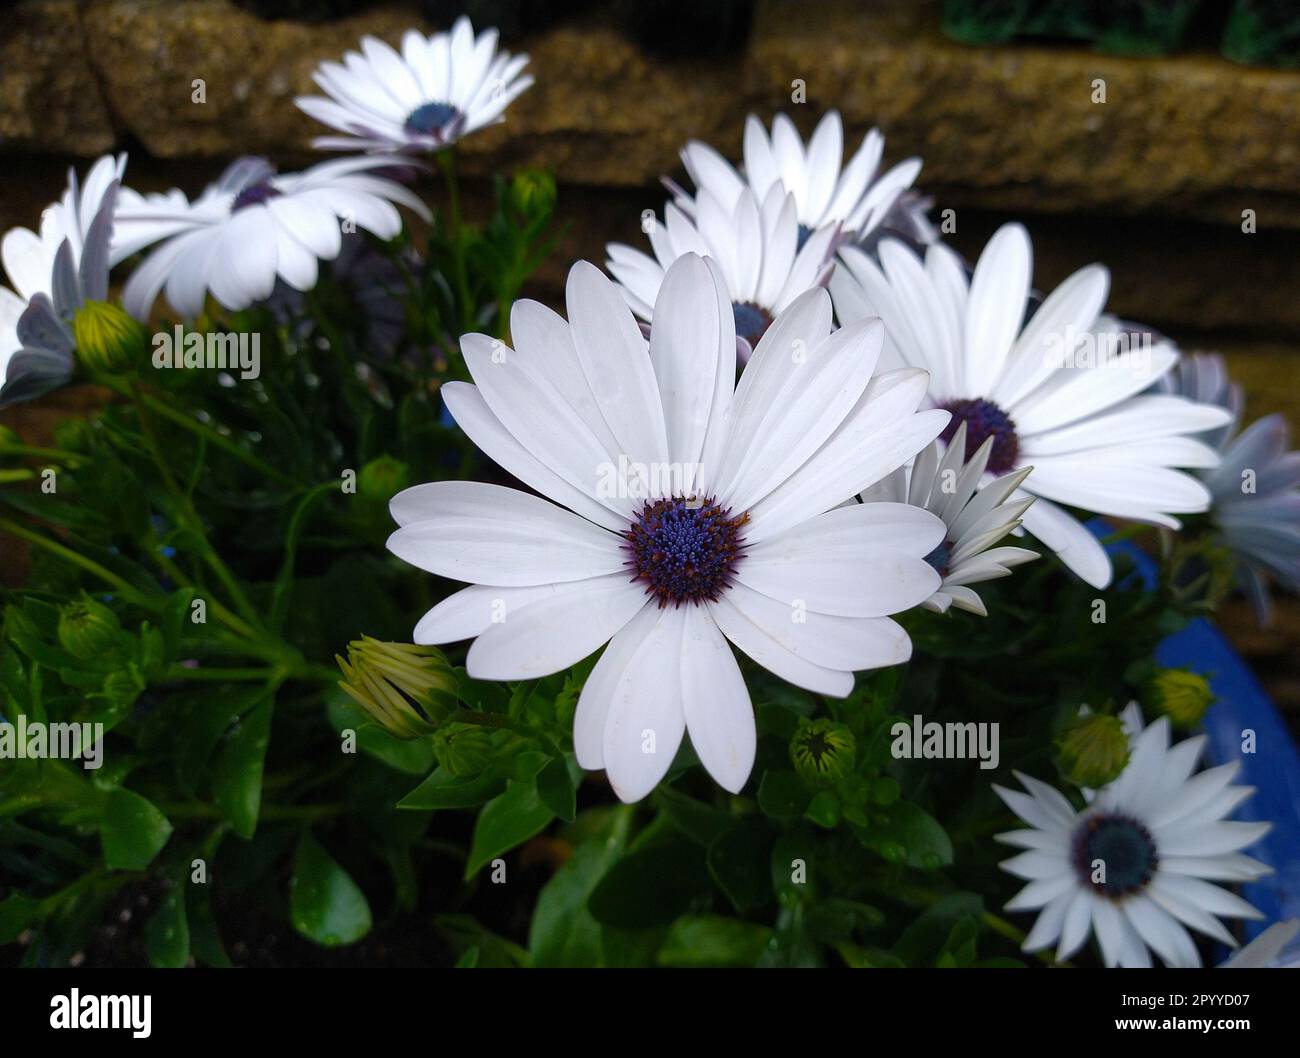 Image of an Osteospermum 'Glistering White' flower head which is also known as an African Daisy or Cape Daisy. Stock Photo